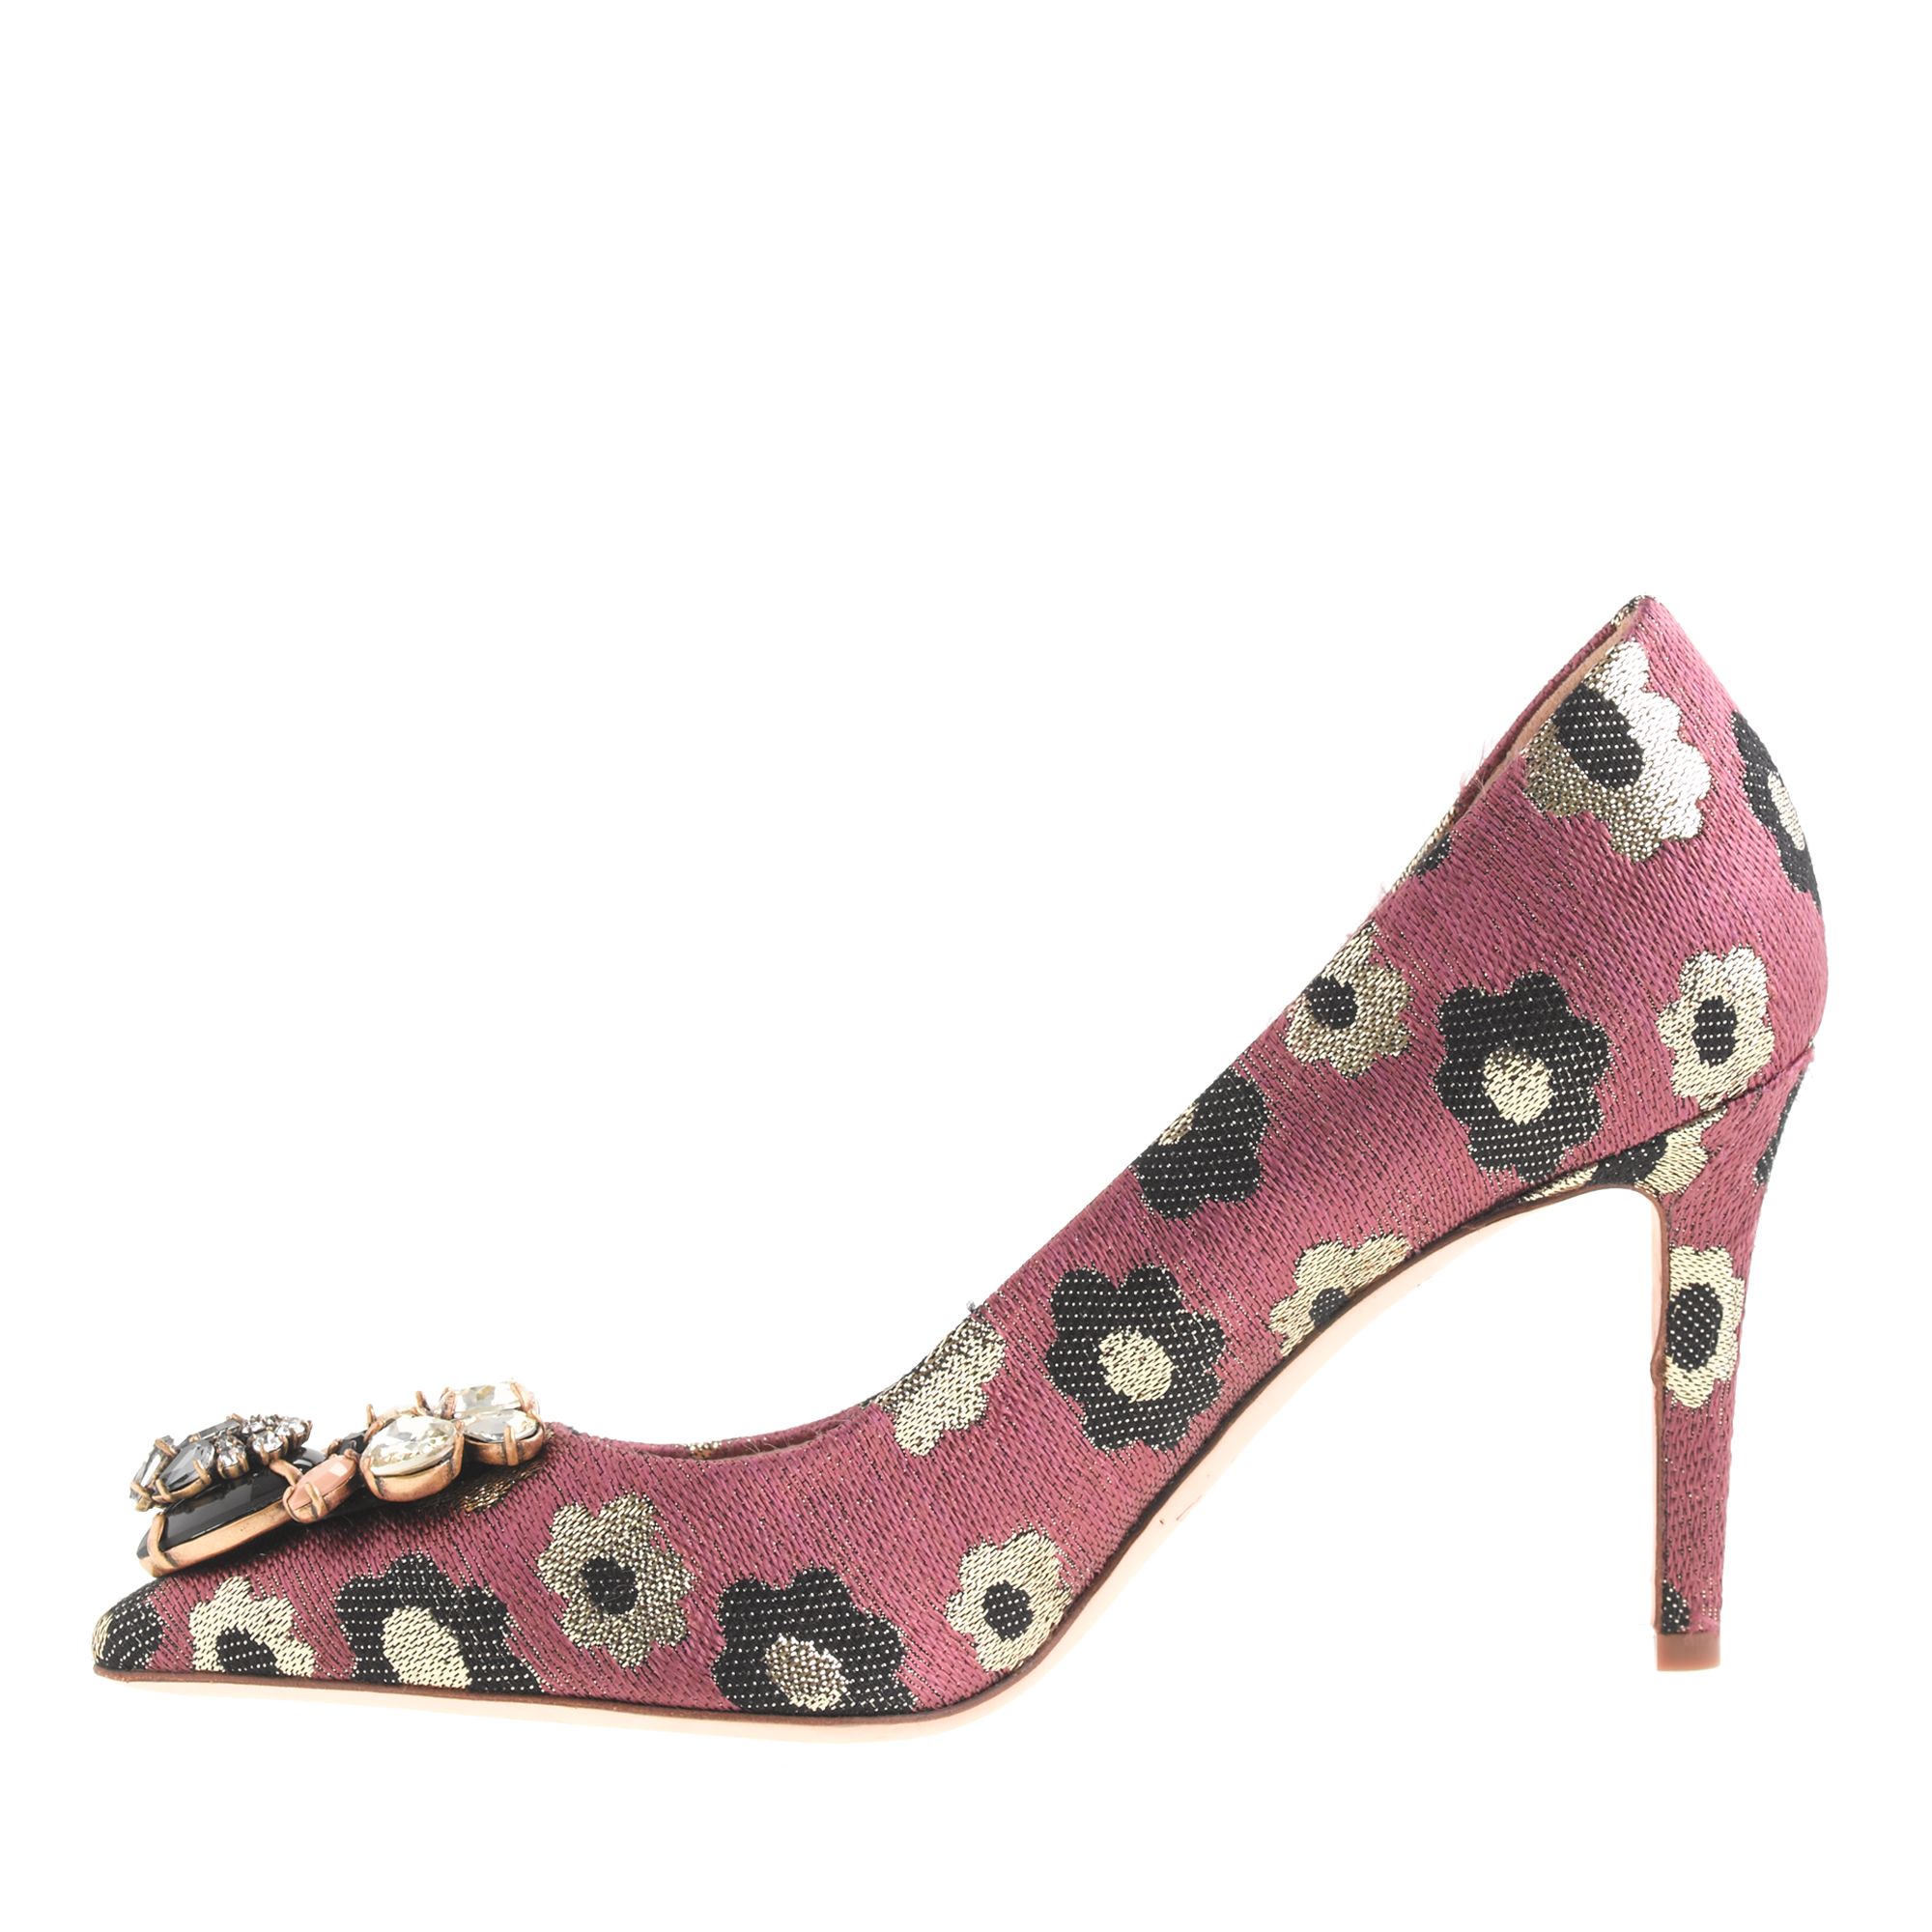 J.crew Everly Jeweled Printed Pumps in Pink | Lyst